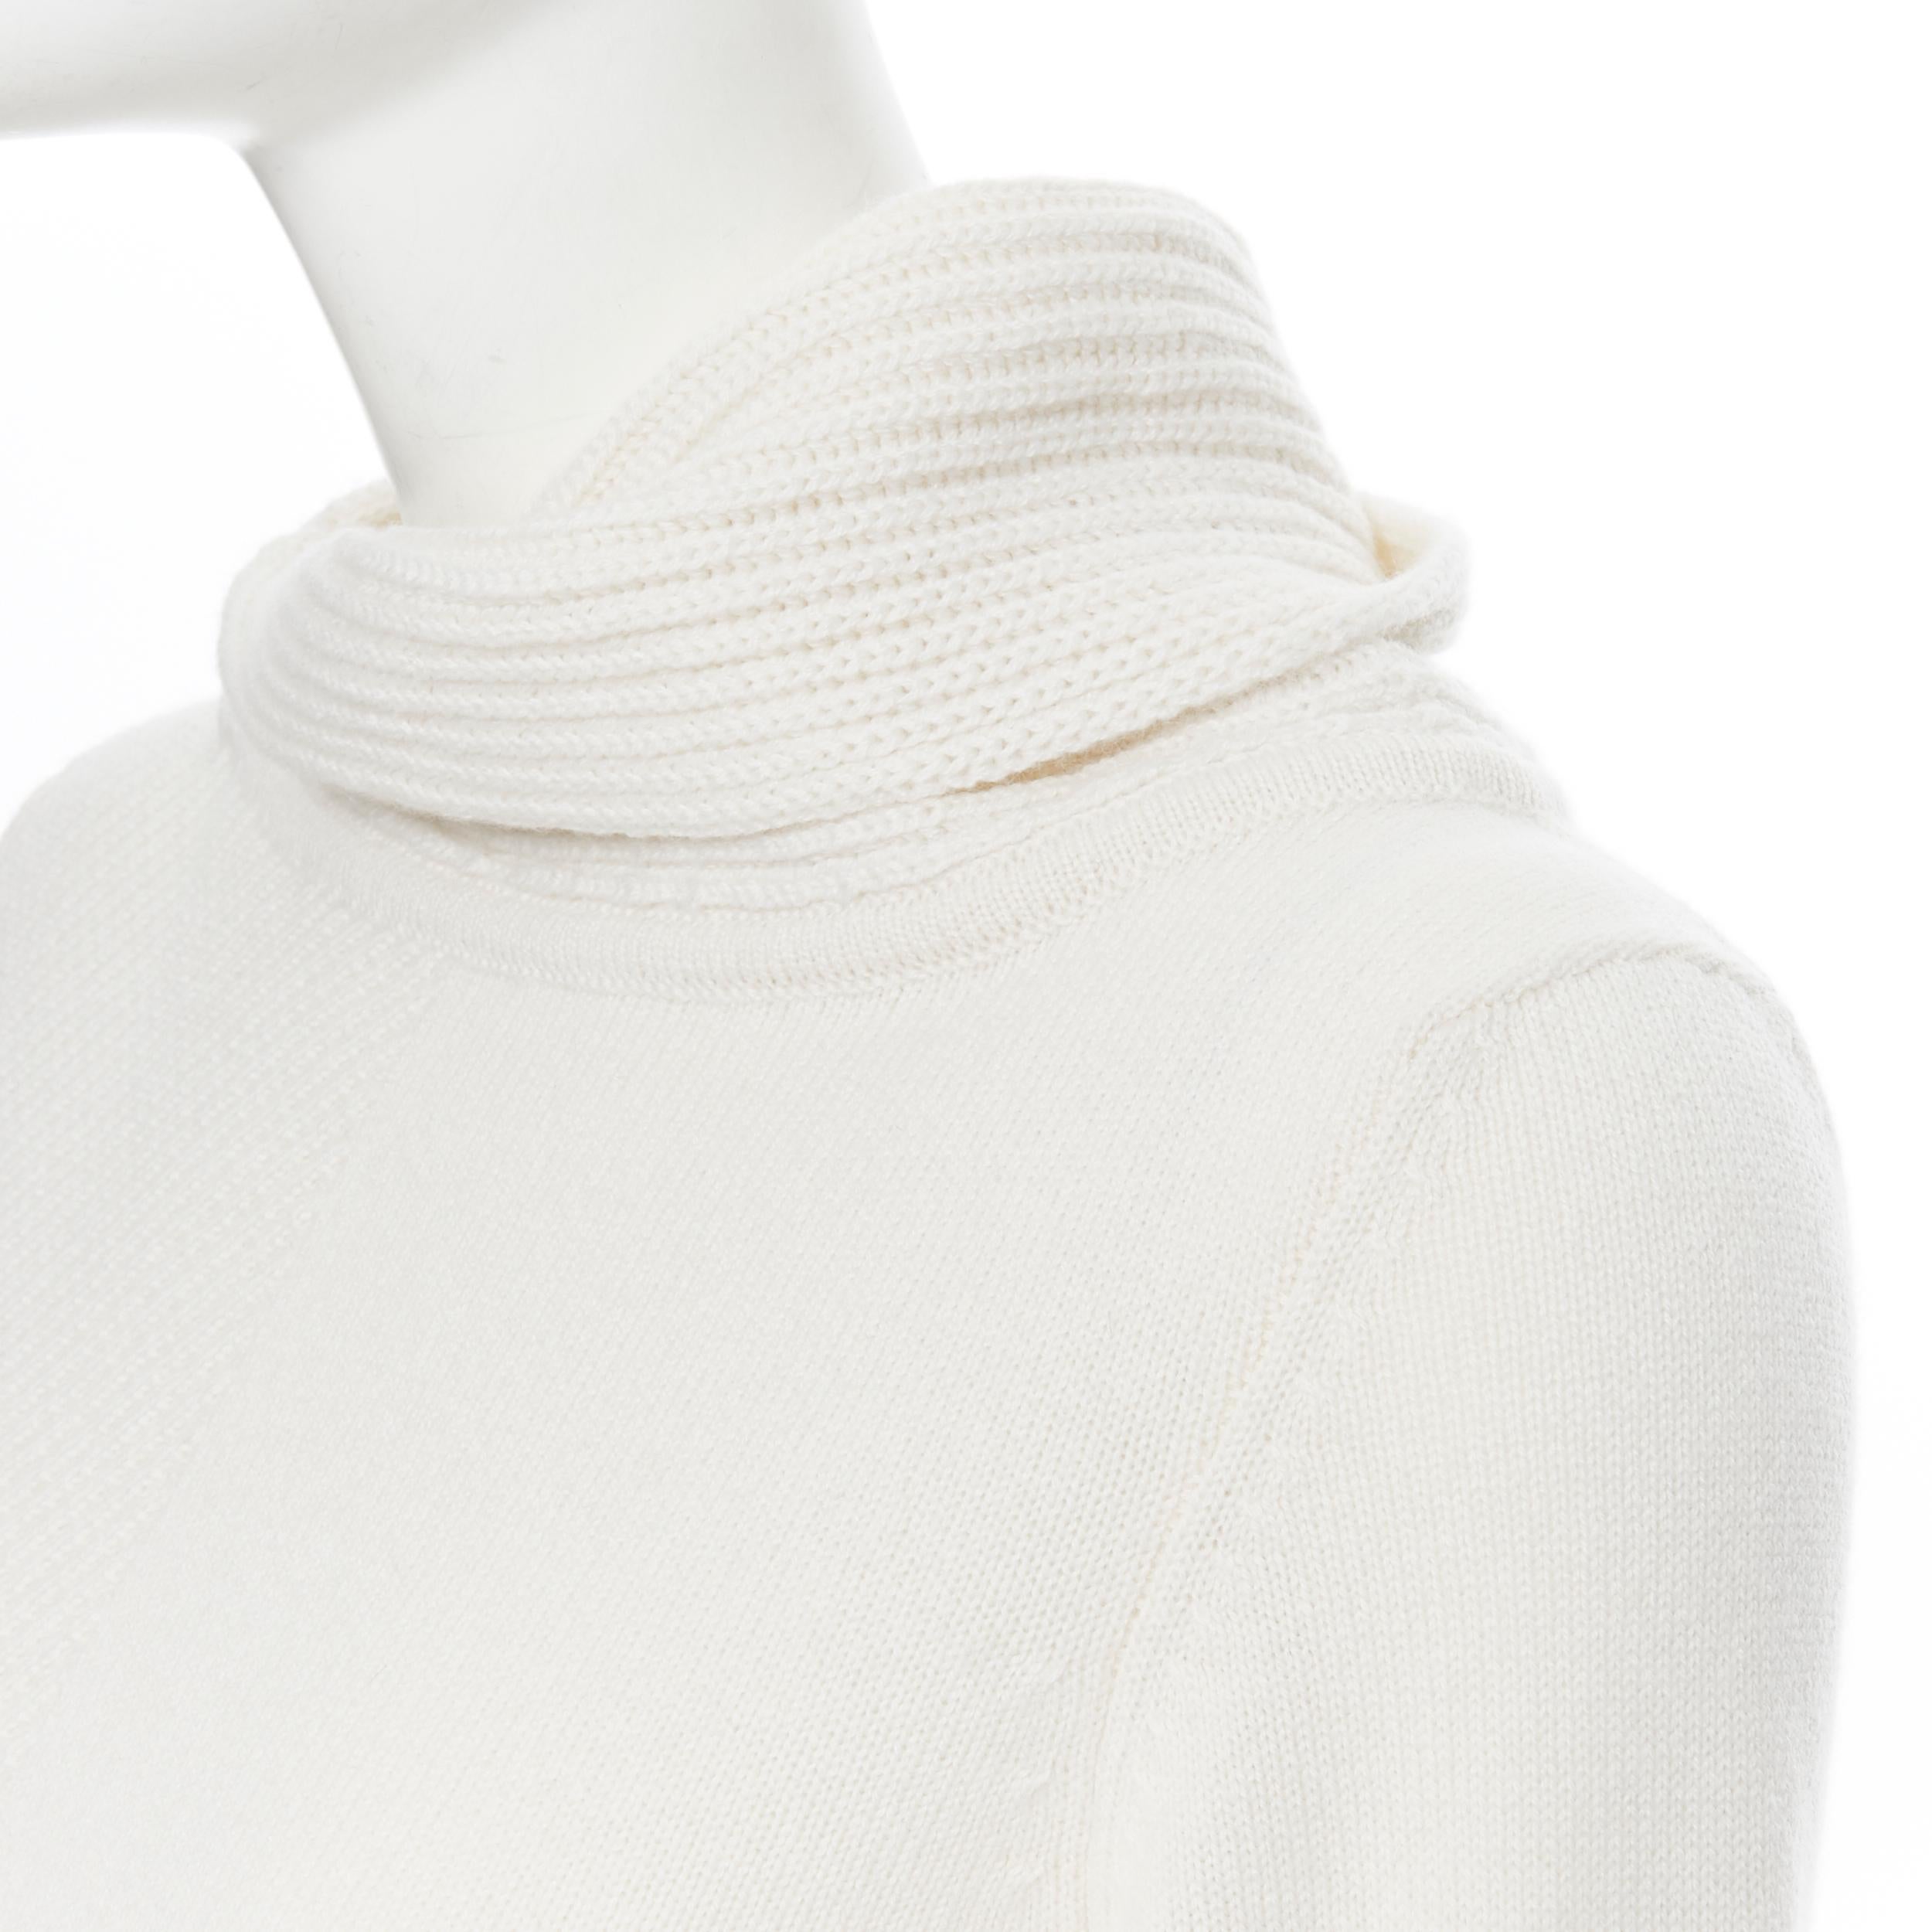 HERMES 100% cashmere ivory beige ribbed knit silver H charm sweater FR34 XS 2